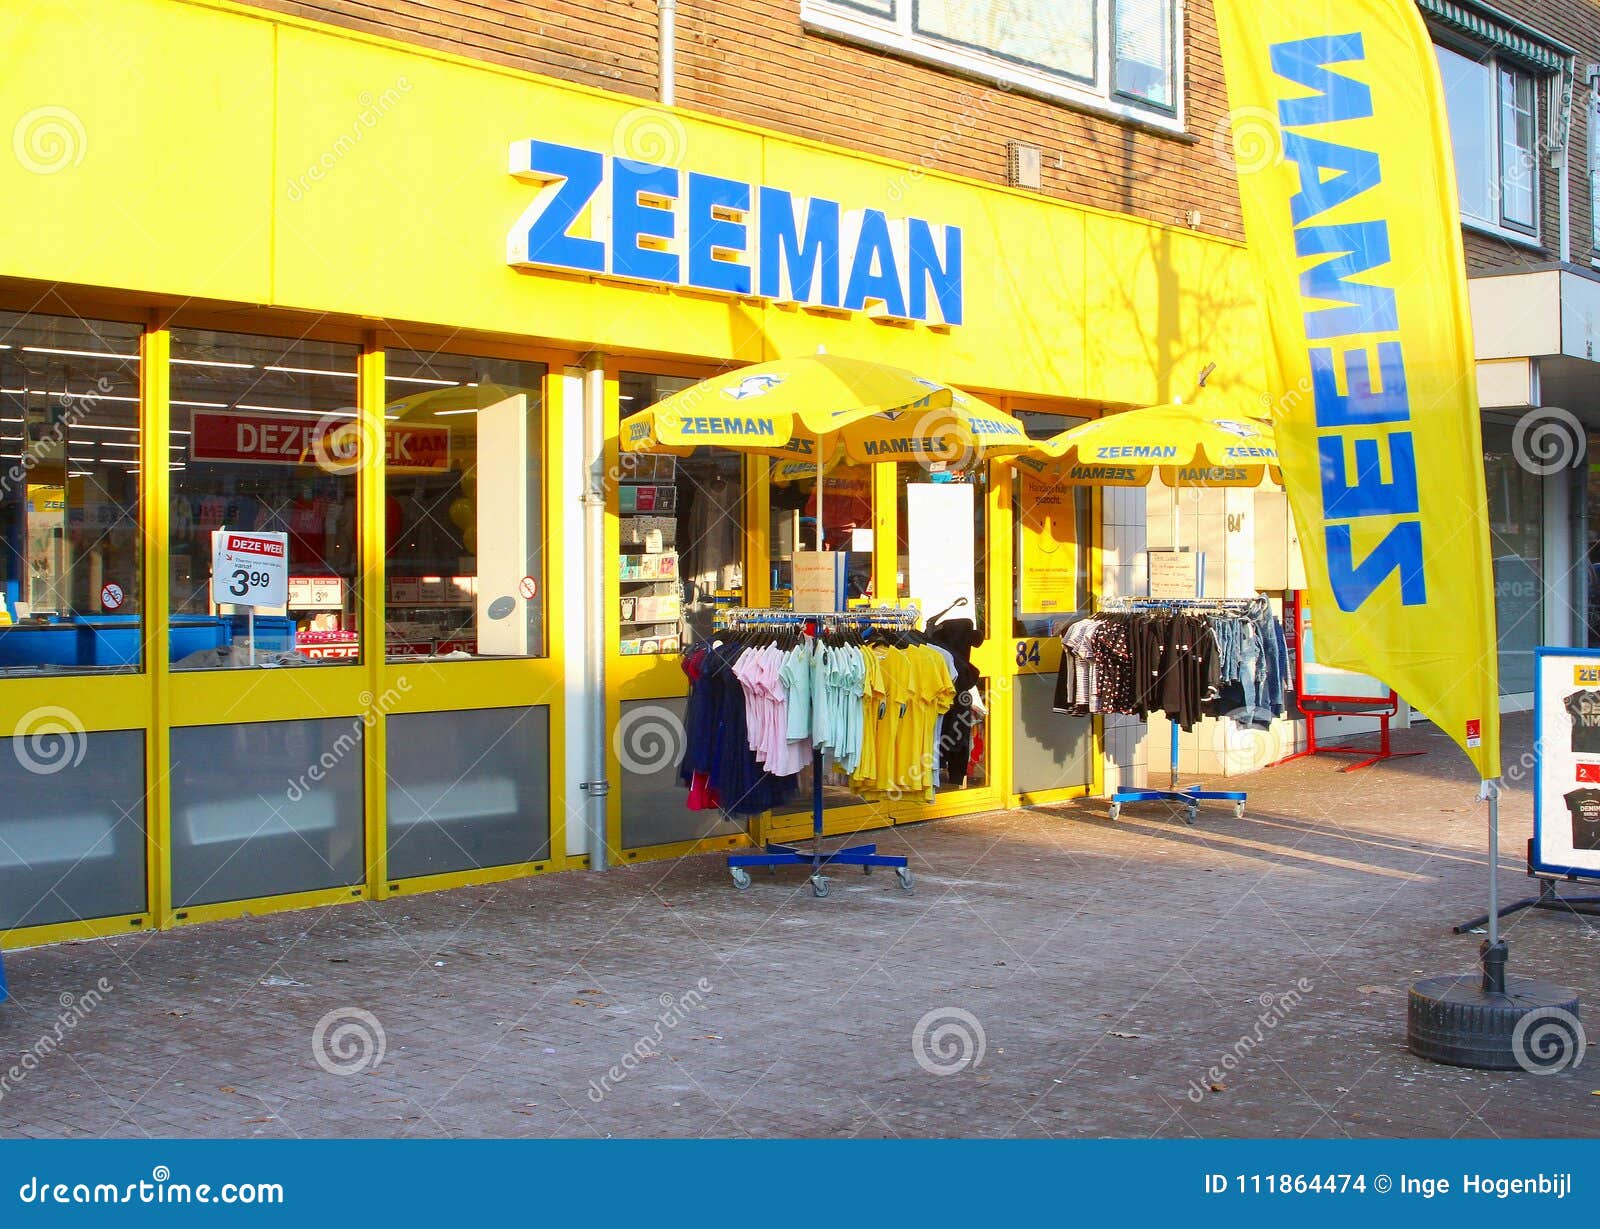 Zeeman Shop Store Building Chain Corporation, Netherlands Editorial Stock  Image - Image of cheap, holland: 111864474